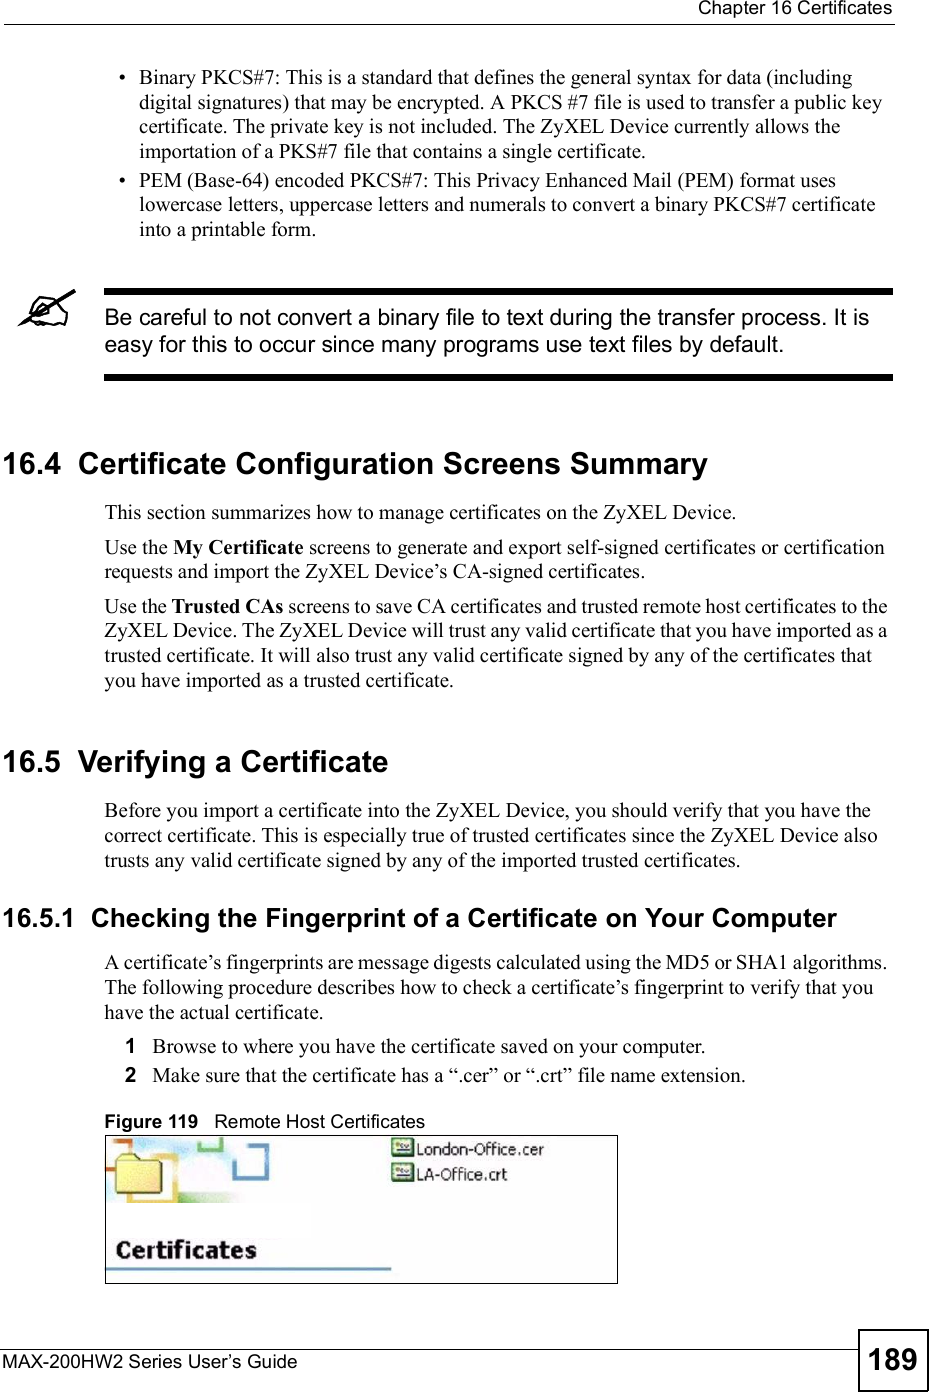  Chapter 16CertificatesMAX-200HW2 Series User s Guide 189 Binary PKCS#7: This is a standard that defines the general syntax for data (including digital signatures) that may be encrypted. A PKCS #7 file is used to transfer a public key certificate. The private key is not included. The ZyXEL Device currently allows the importation of a PKS#7 file that contains a single certificate.  PEM (Base-64) encoded PKCS#7: This Privacy Enhanced Mail (PEM) format uses lowercase letters, uppercase letters and numerals to convert a binary PKCS#7 certificate into a printable form.Be careful to not convert a binary file to text during the transfer process. It is easy for this to occur since many programs use text files by default. 16.4  Certificate Configuration Screens SummaryThis section summarizes how to manage certificates on the ZyXEL Device.Use the My Certificate screens to generate and export self-signed certificates or certification requests and import the ZyXEL Device!s CA-signed certificates.Use the Trusted CAs screens to save CA certificates and trusted remote host certificates to the ZyXEL Device. The ZyXEL Device will trust any valid certificate that you have imported as a trusted certificate. It will also trust any valid certificate signed by any of the certificates that you have imported as a trusted certificate.16.5  Verifying a CertificateBefore you import a certificate into the ZyXEL Device, you should verify that you have the correct certificate. This is especially true of trusted certificates since the ZyXEL Device also trusts any valid certificate signed by any of the imported trusted certificates.16.5.1  Checking the Fingerprint of a Certificate on Your ComputerA certificate!s fingerprints are message digests calculated using the MD5 or SHA1 algorithms. The following procedure describes how to check a certificate!s fingerprint to verify that you have the actual certificate. 1Browse to where you have the certificate saved on your computer. 2Make sure that the certificate has a &quot;.cer# or &quot;.crt# file name extension.Figure 119   Remote Host Certificates